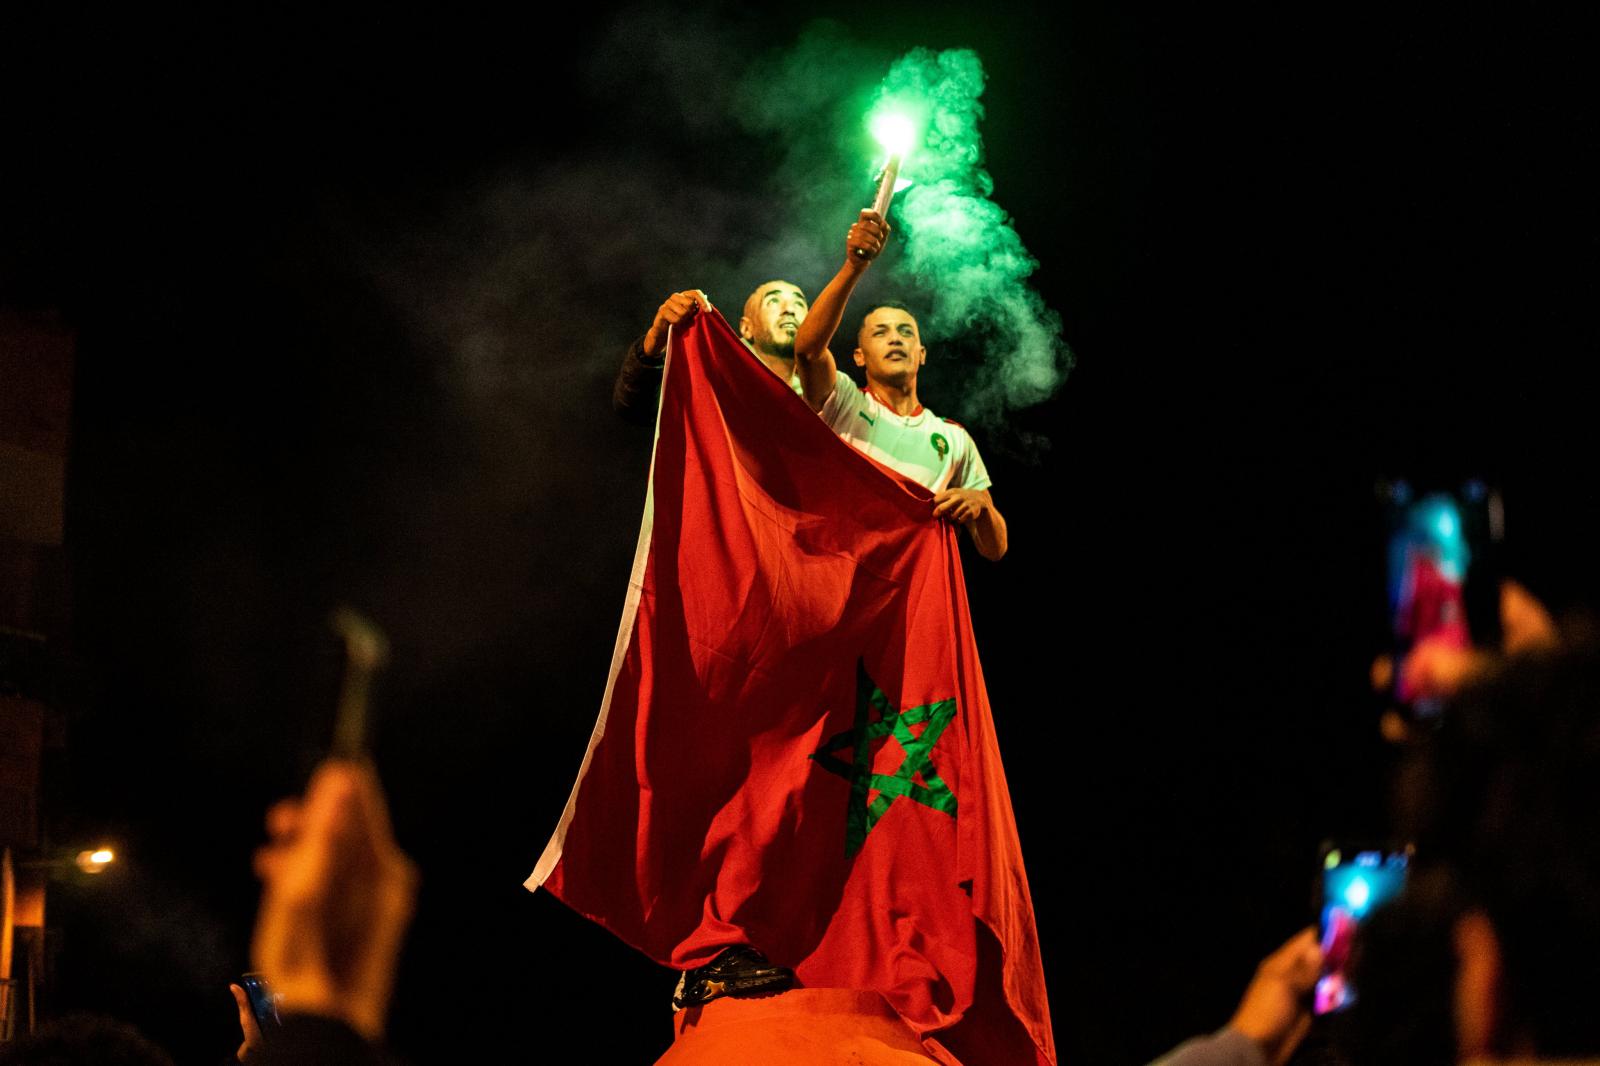 Overview - Moroccan football team supporters celebrate their win...